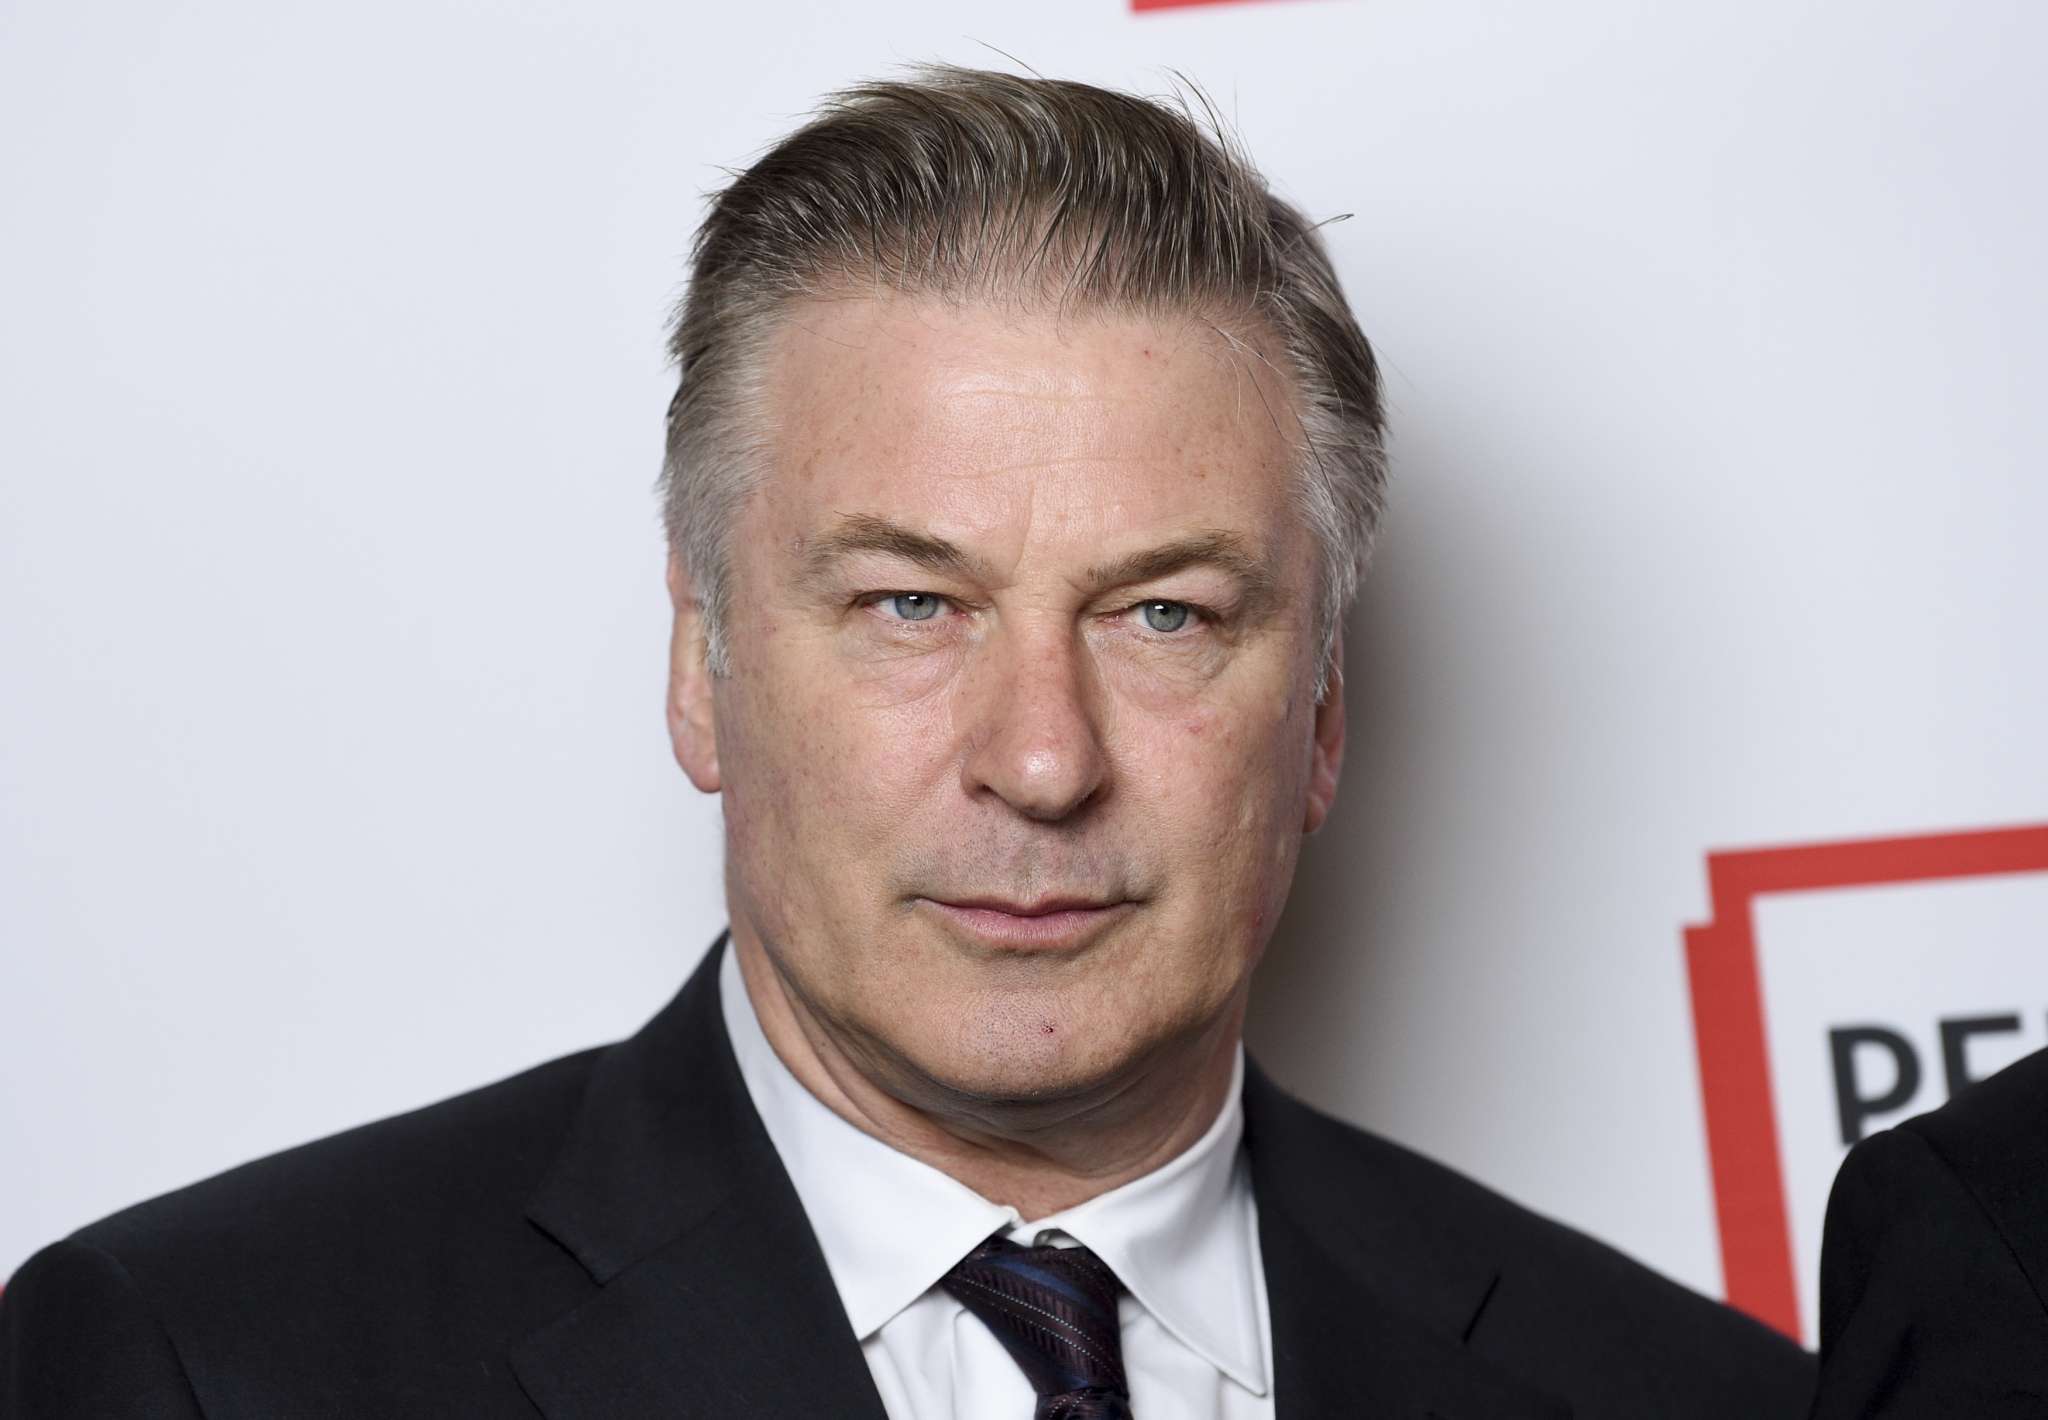 ”alec-baldwin-breaks-peoples-hearts-with-this-interview-following-the-tragedy-hes-been-involved-in”